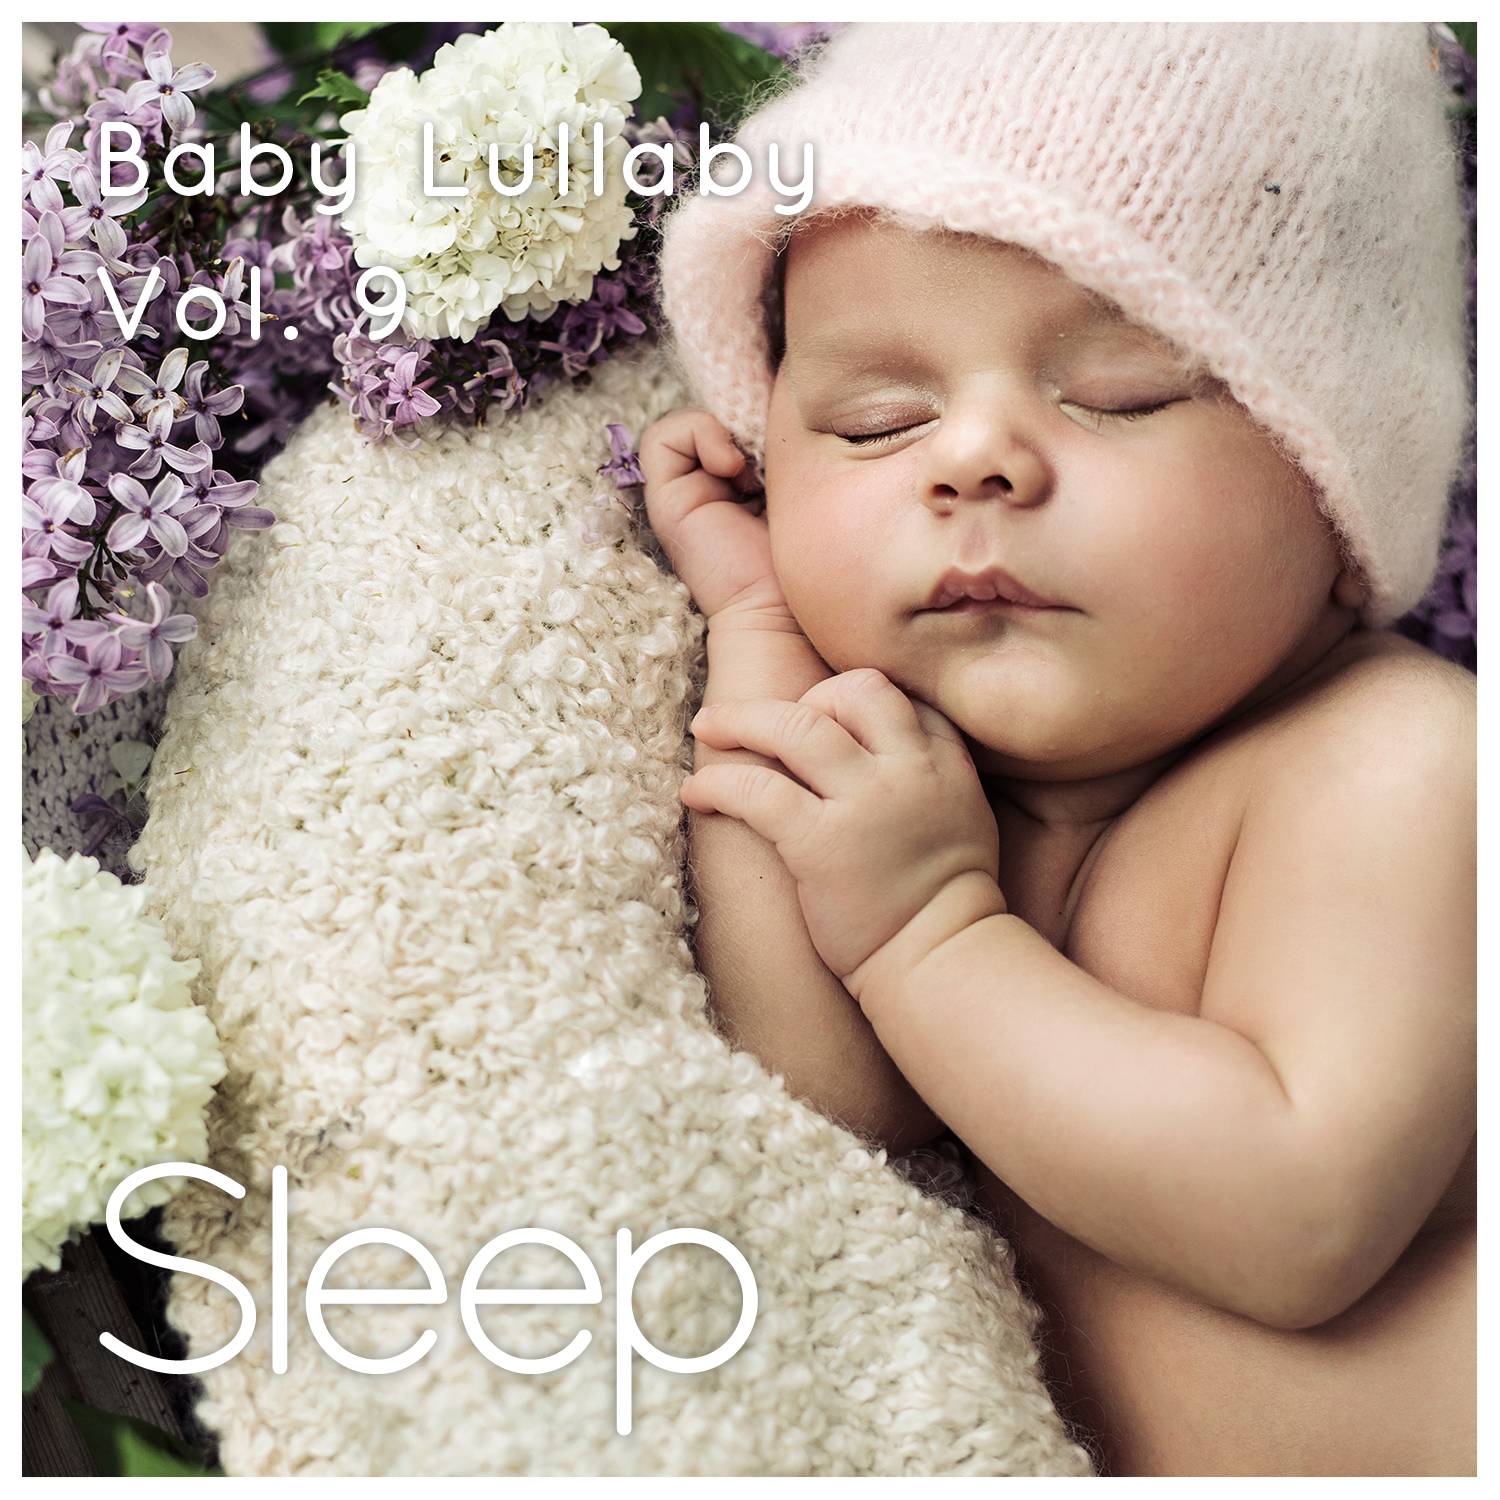 Baby Sleep Ambient Lullaby, Pt. 41